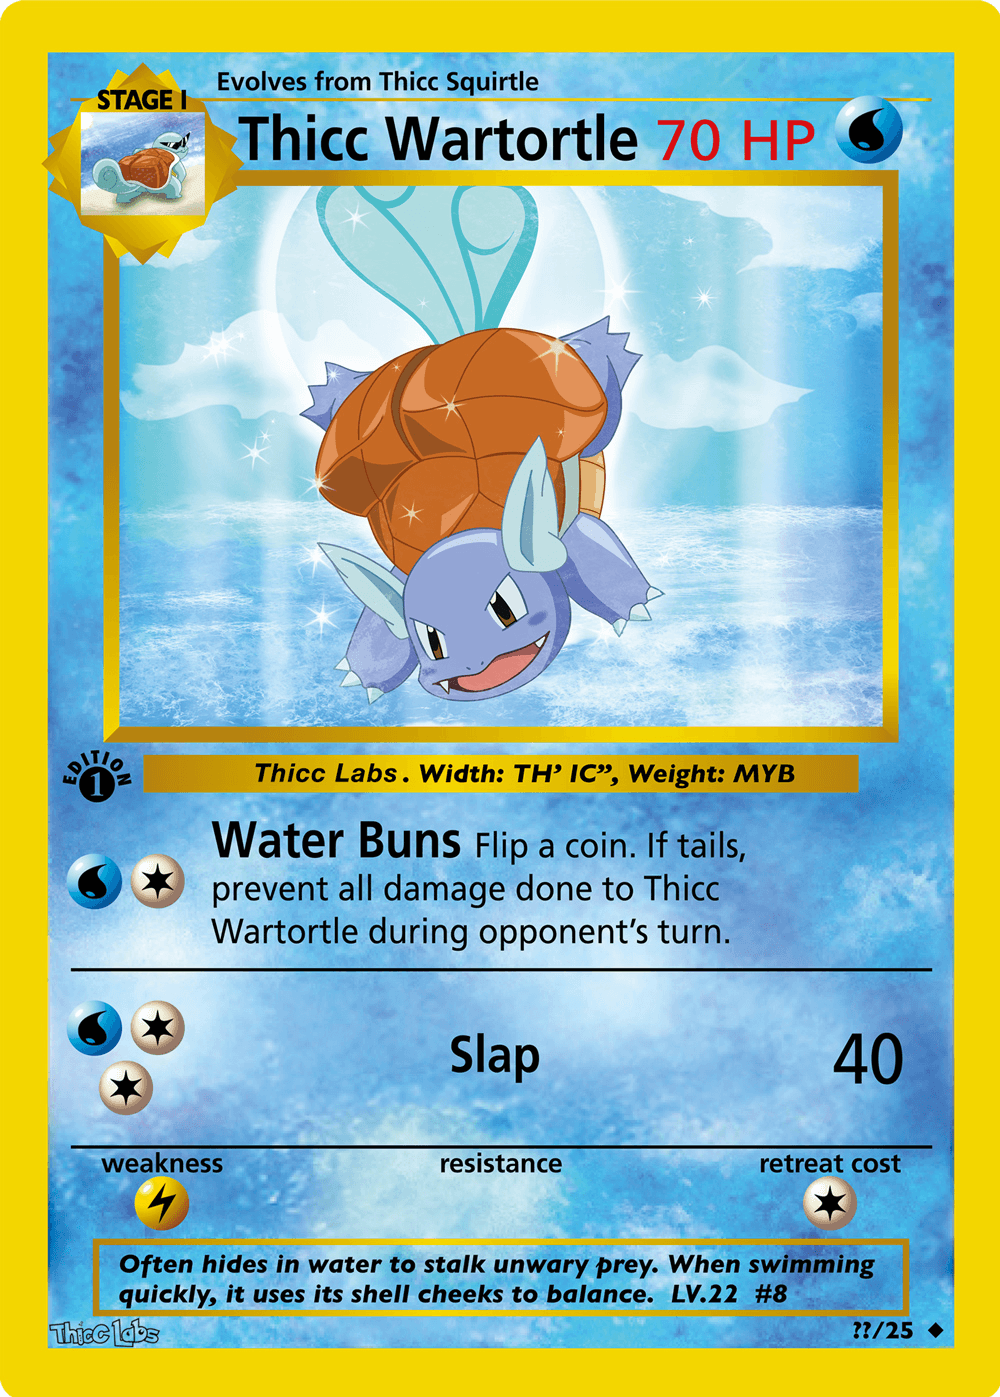 Thicc Wartortle